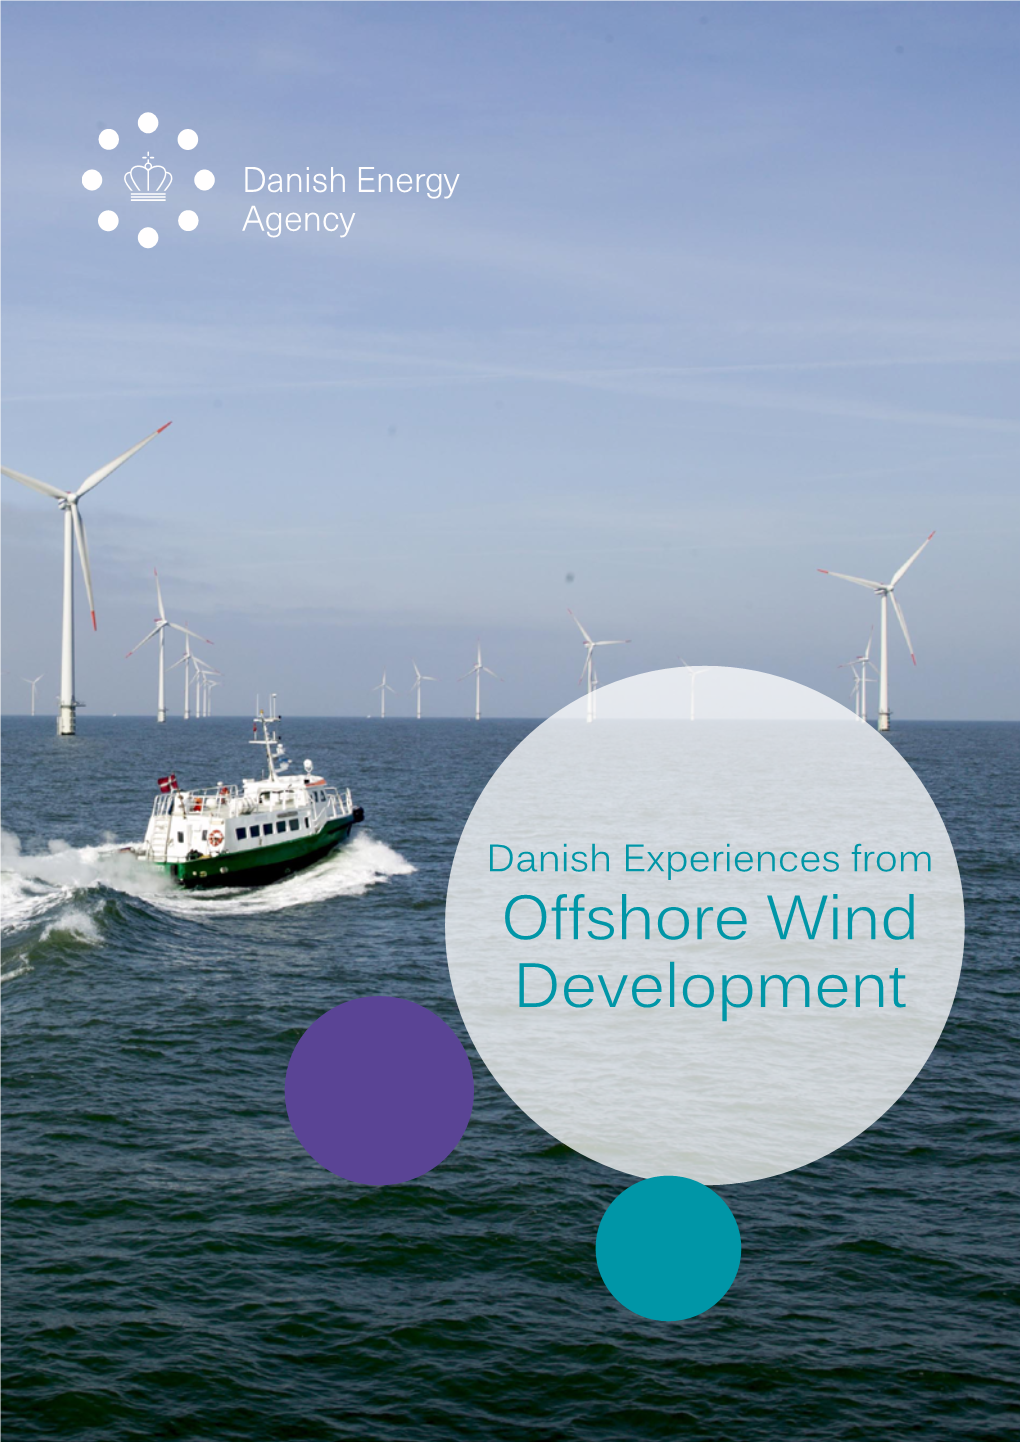 “Danish Experiences from Offshore Wind Development”